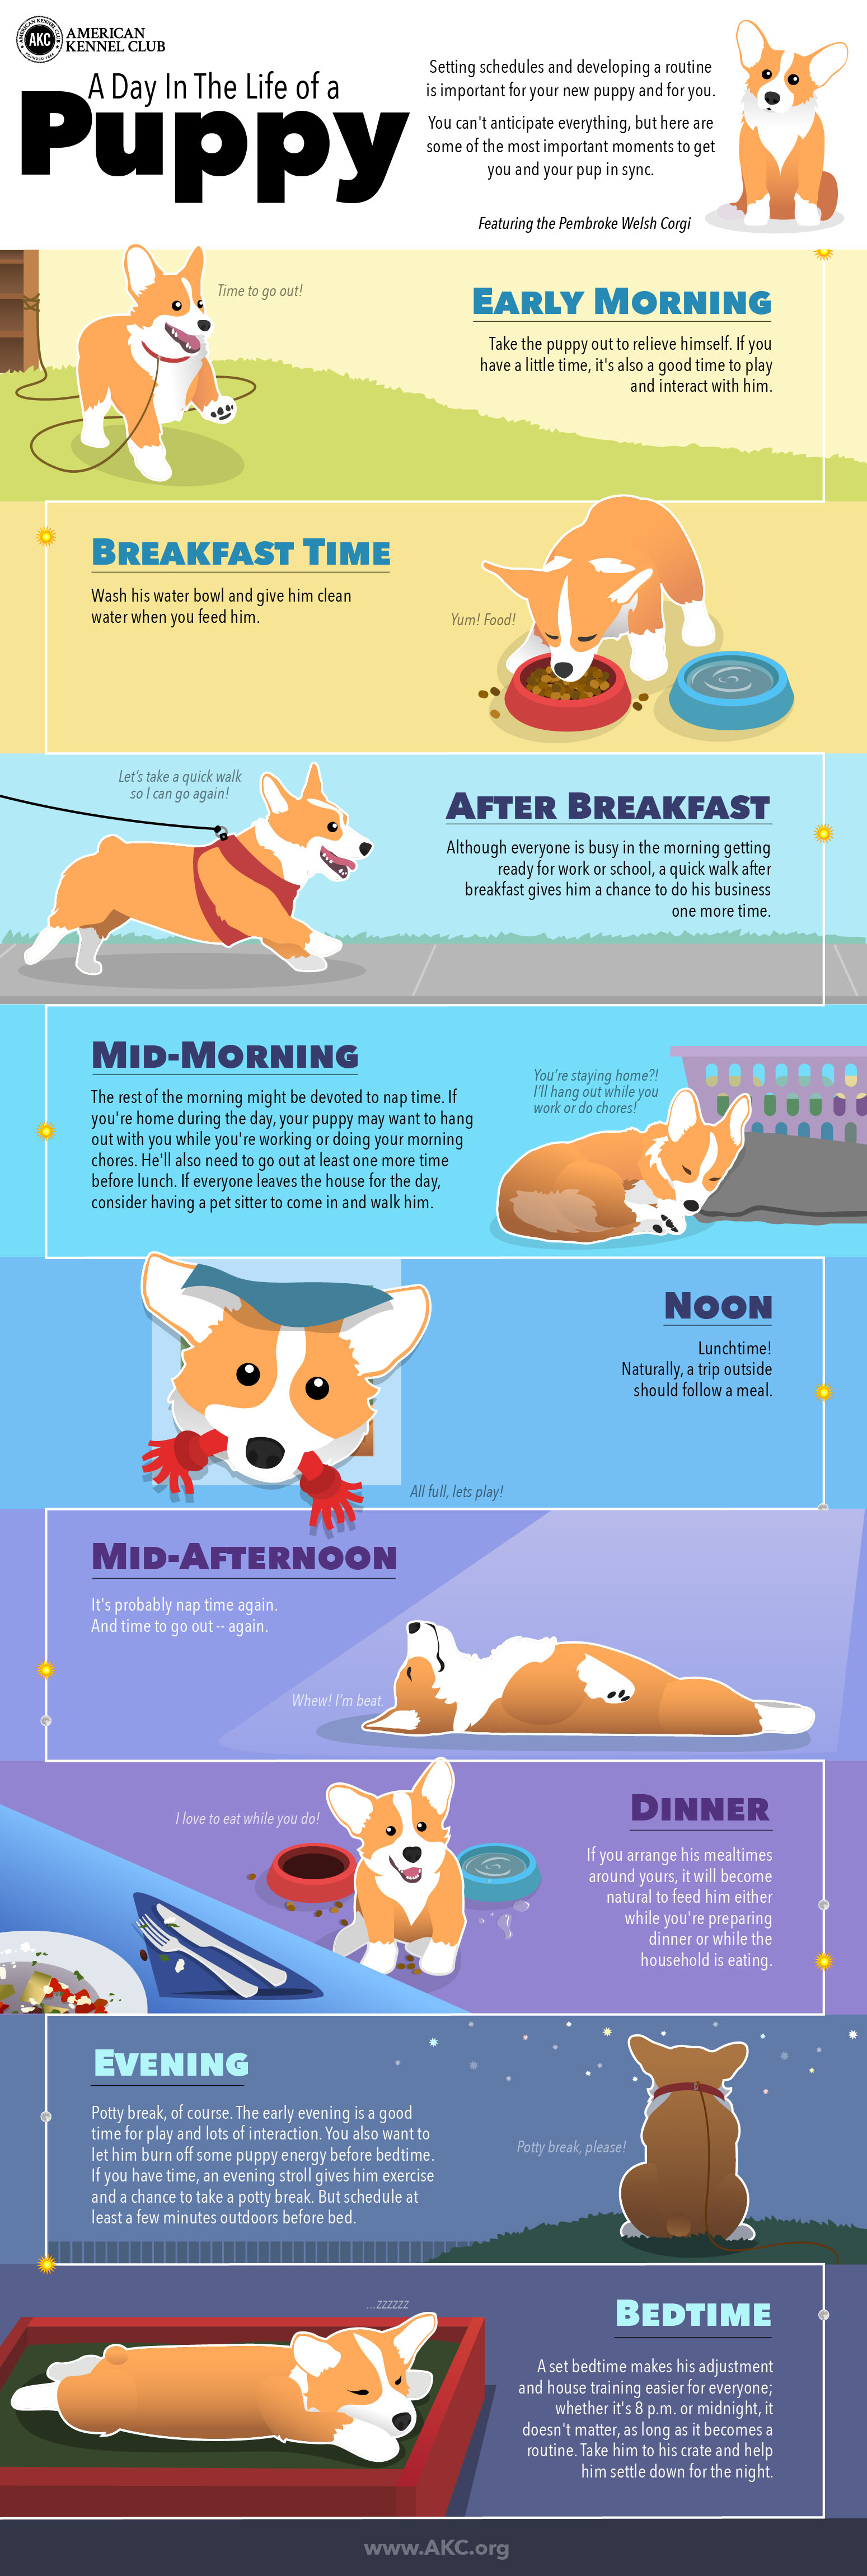 Why Developing A Daily Schedule For Your New Puppy Is The Key To Success